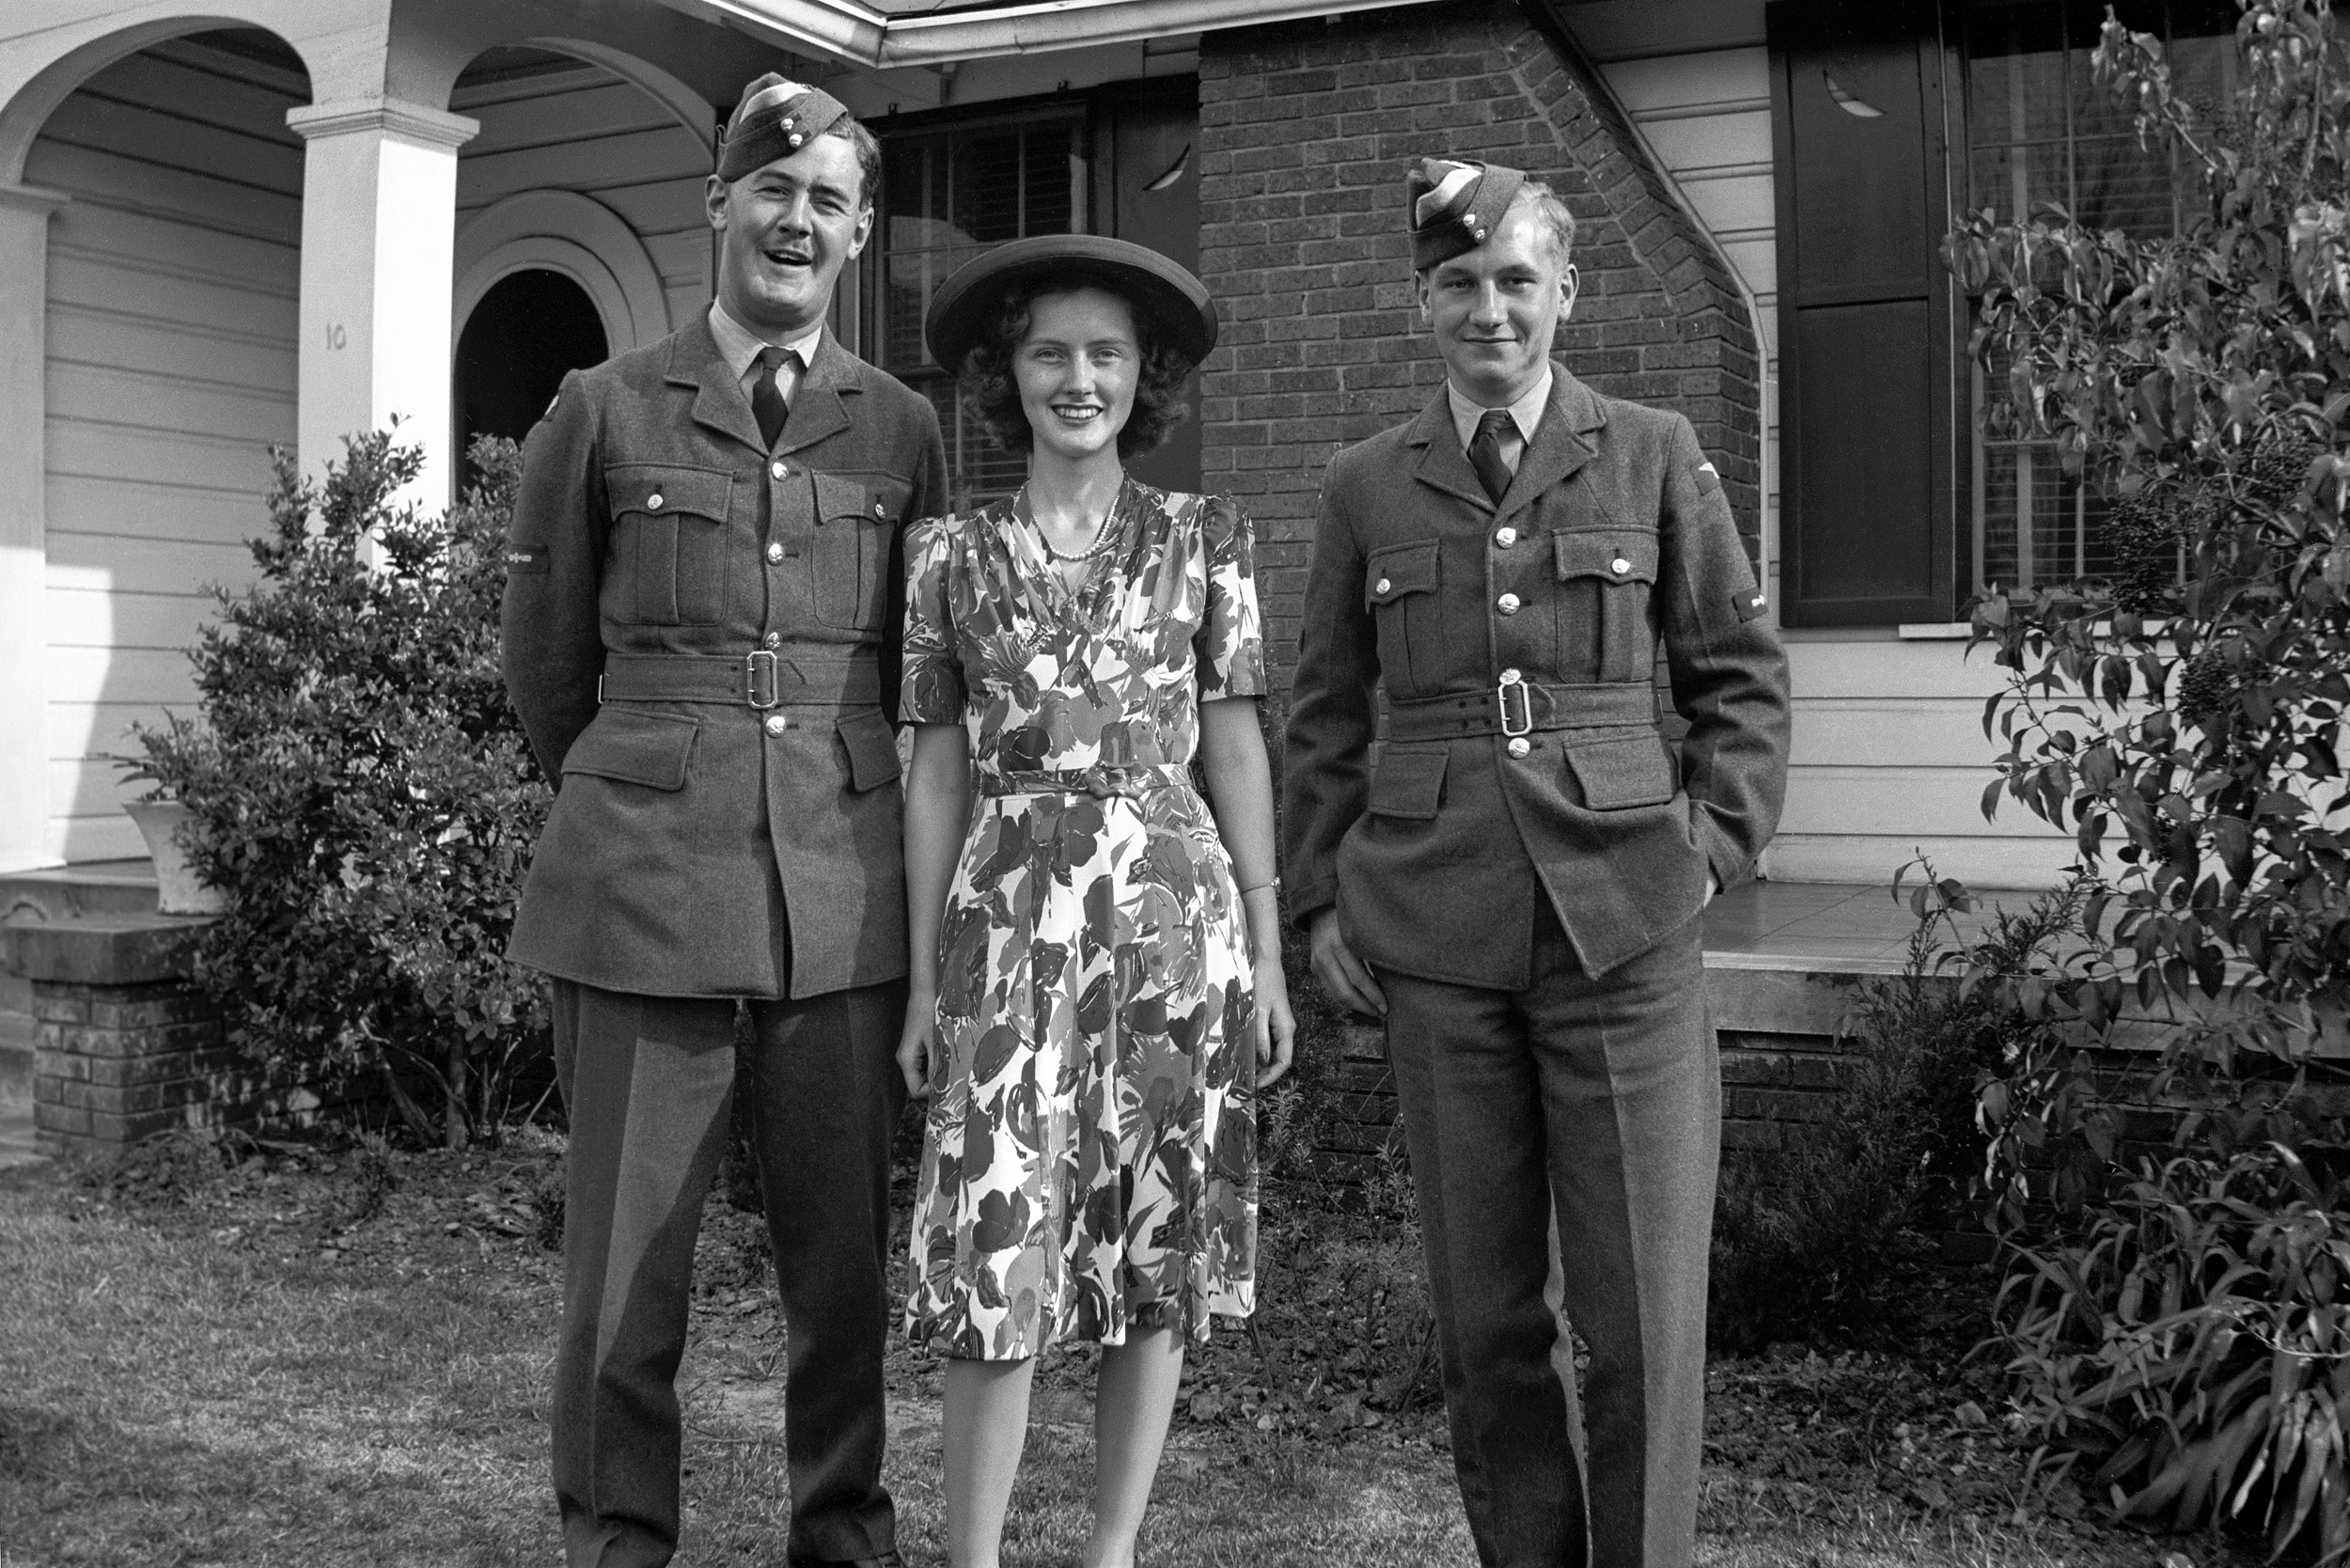 My mother with two British soldiers, in the USA during WWII. Scanned from the nitrate negative. View full size.